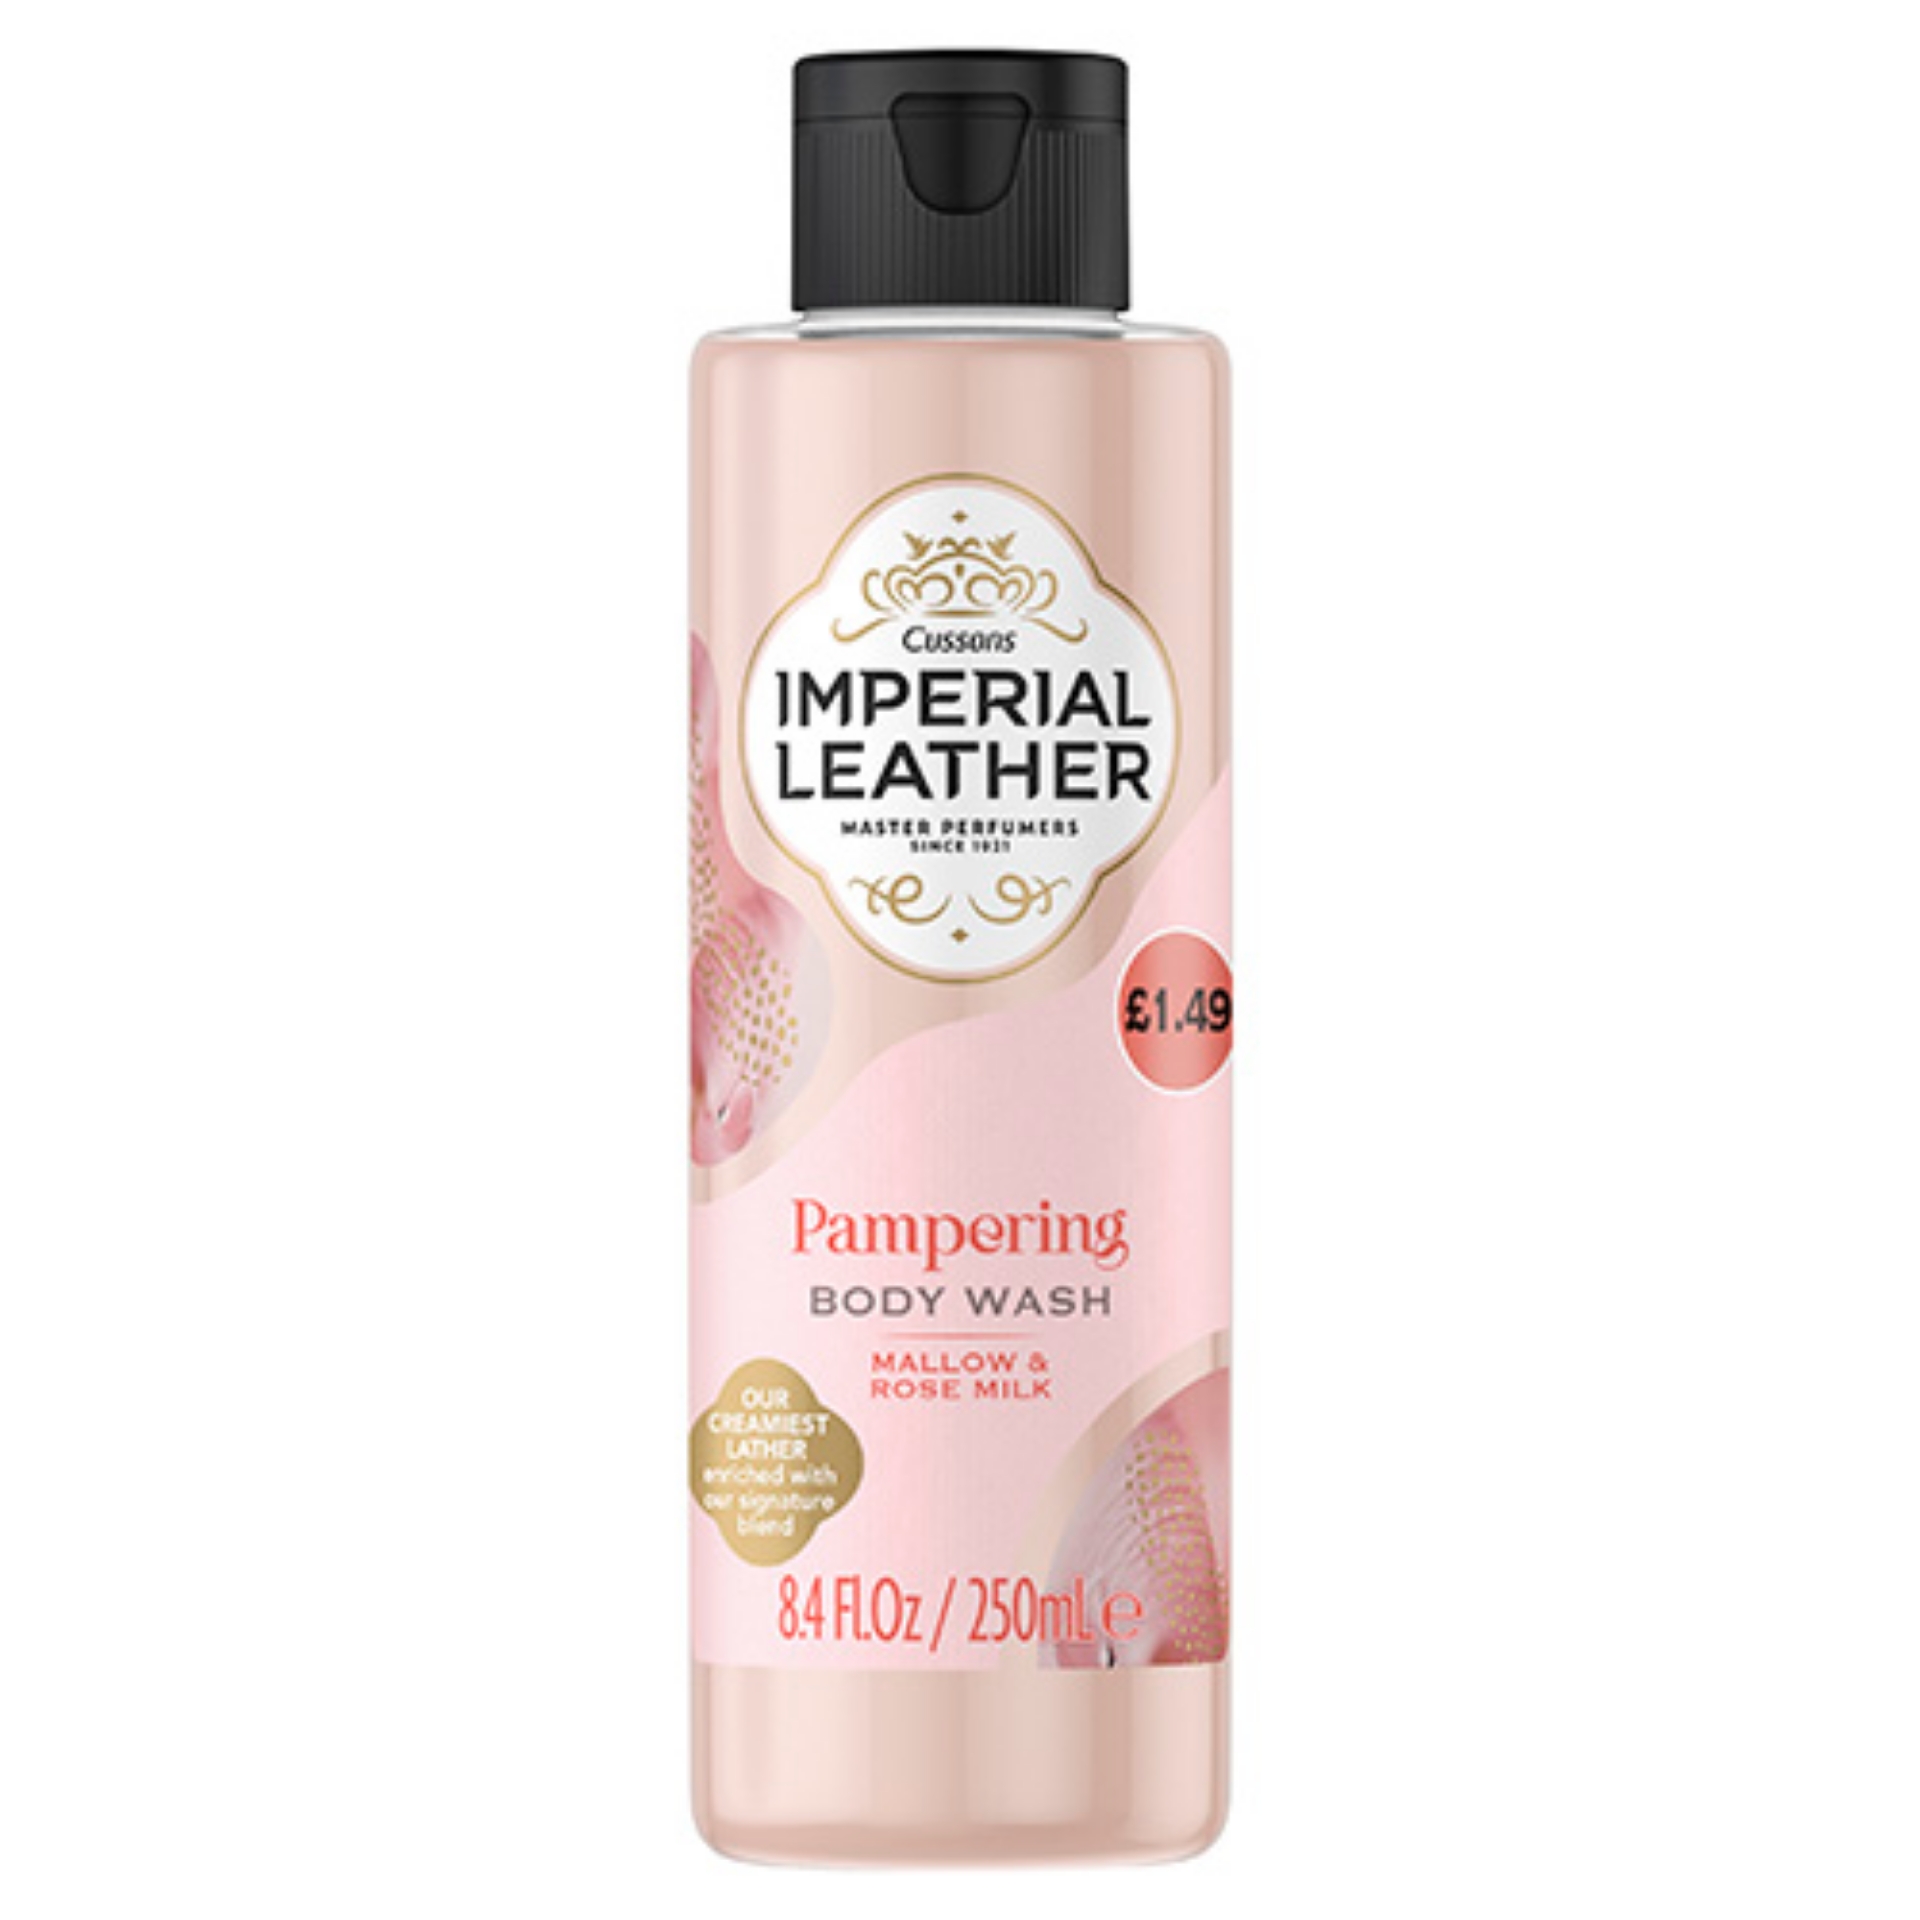 Picture of IMPERIAL LEATHER BODYWASH - PAMPERING pm1.49